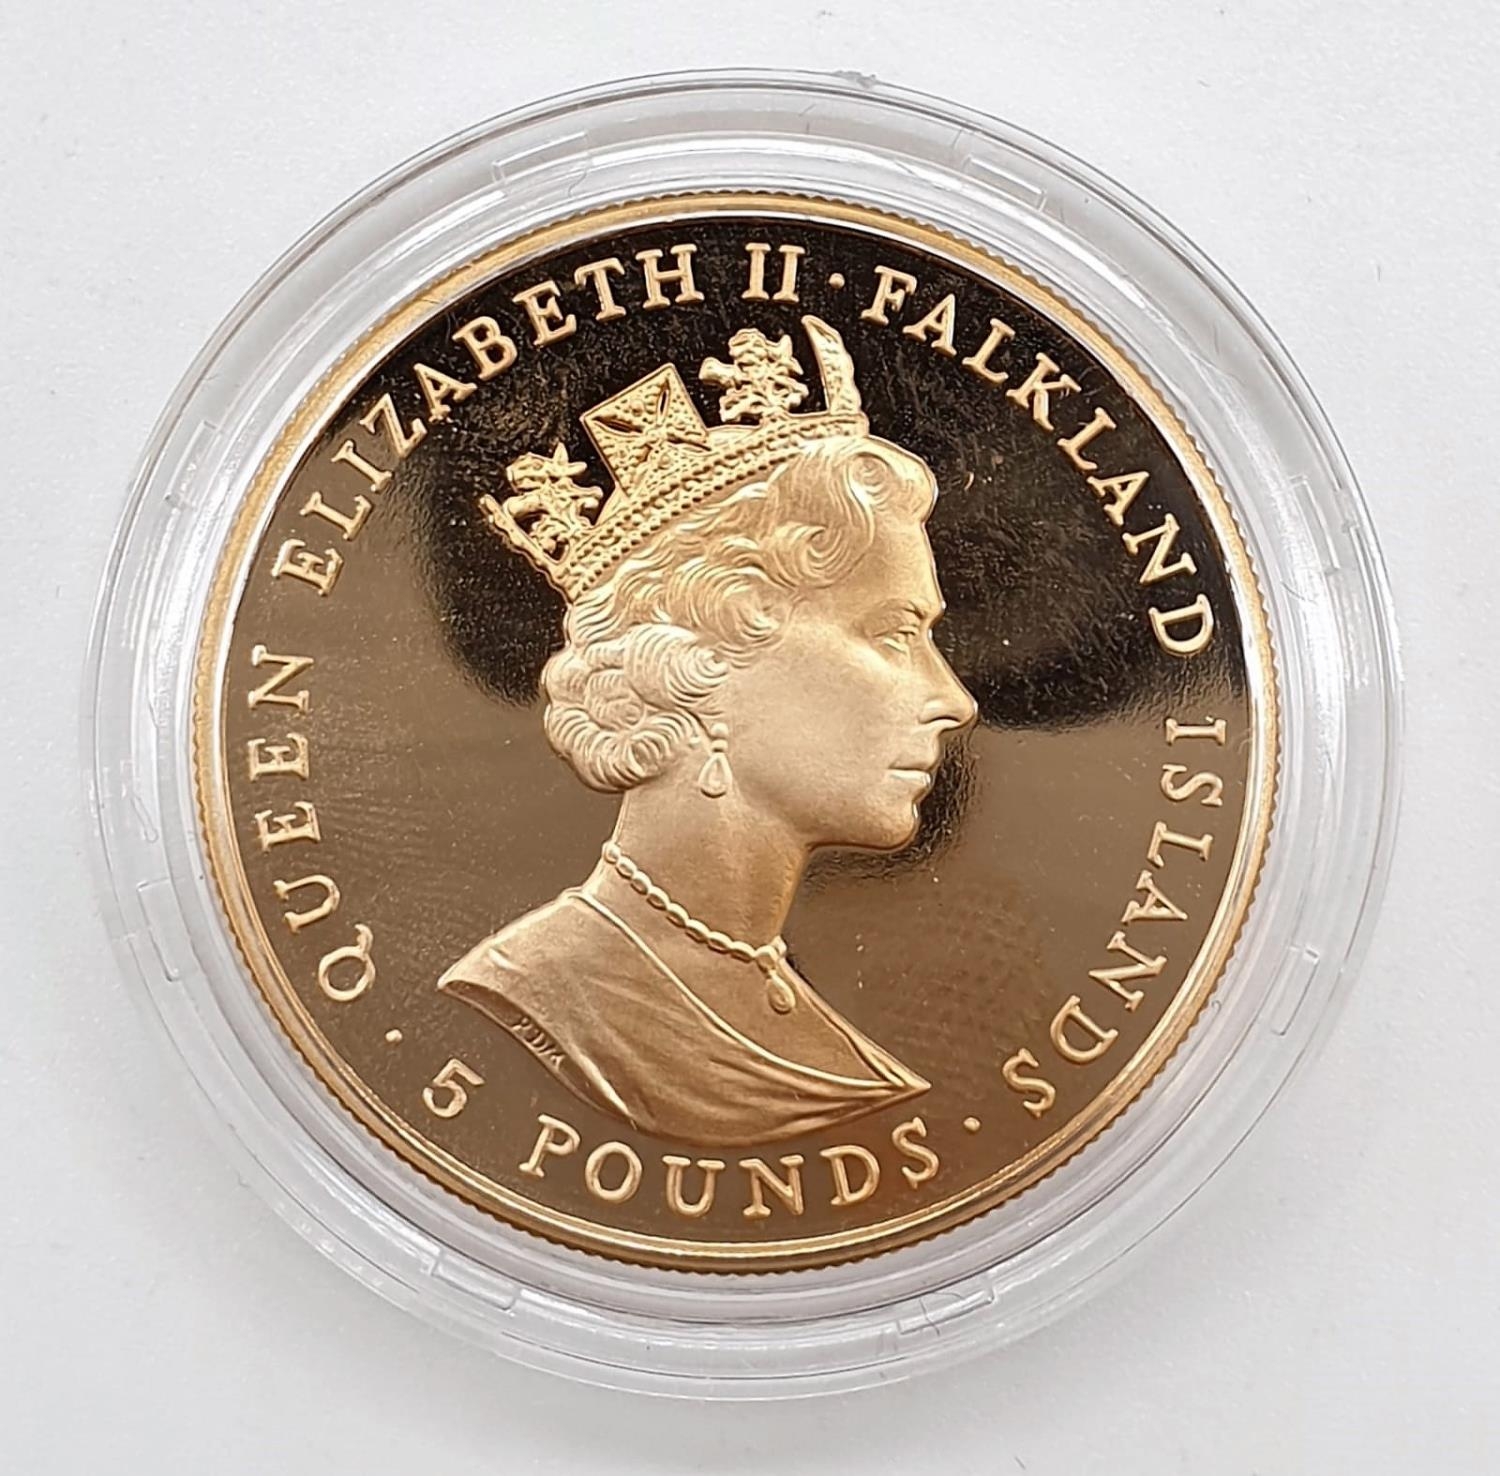 1991 FALKLANDS ISLAND £5 GOLD PROOF ROYAL WEDDING 10TH ANNIVERSARY, 22ct GOLD WEIGHT 39.94g, IN - Image 3 of 4